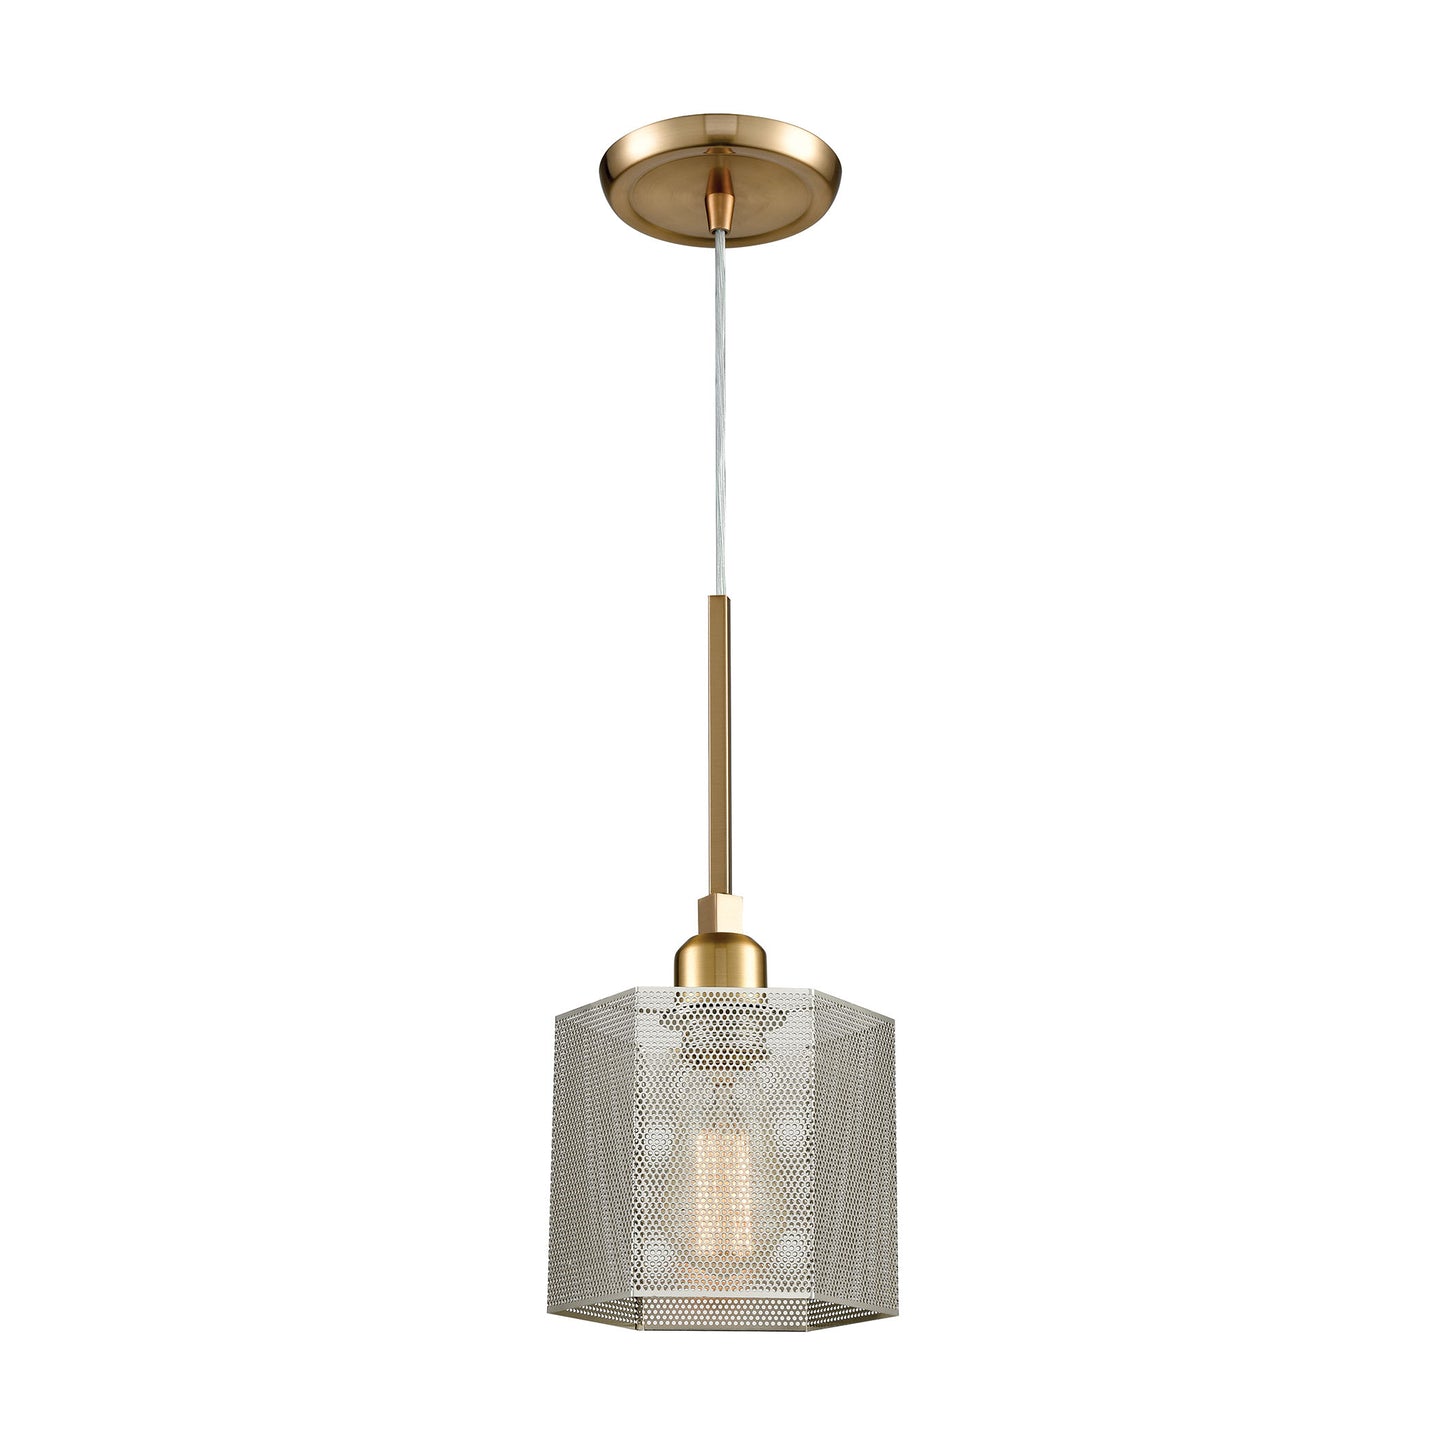 ELK Lighting 21112/1 - Compartir 6" Wide 1-Light Mini Pendant in Satin Brass with Perforated Metal S